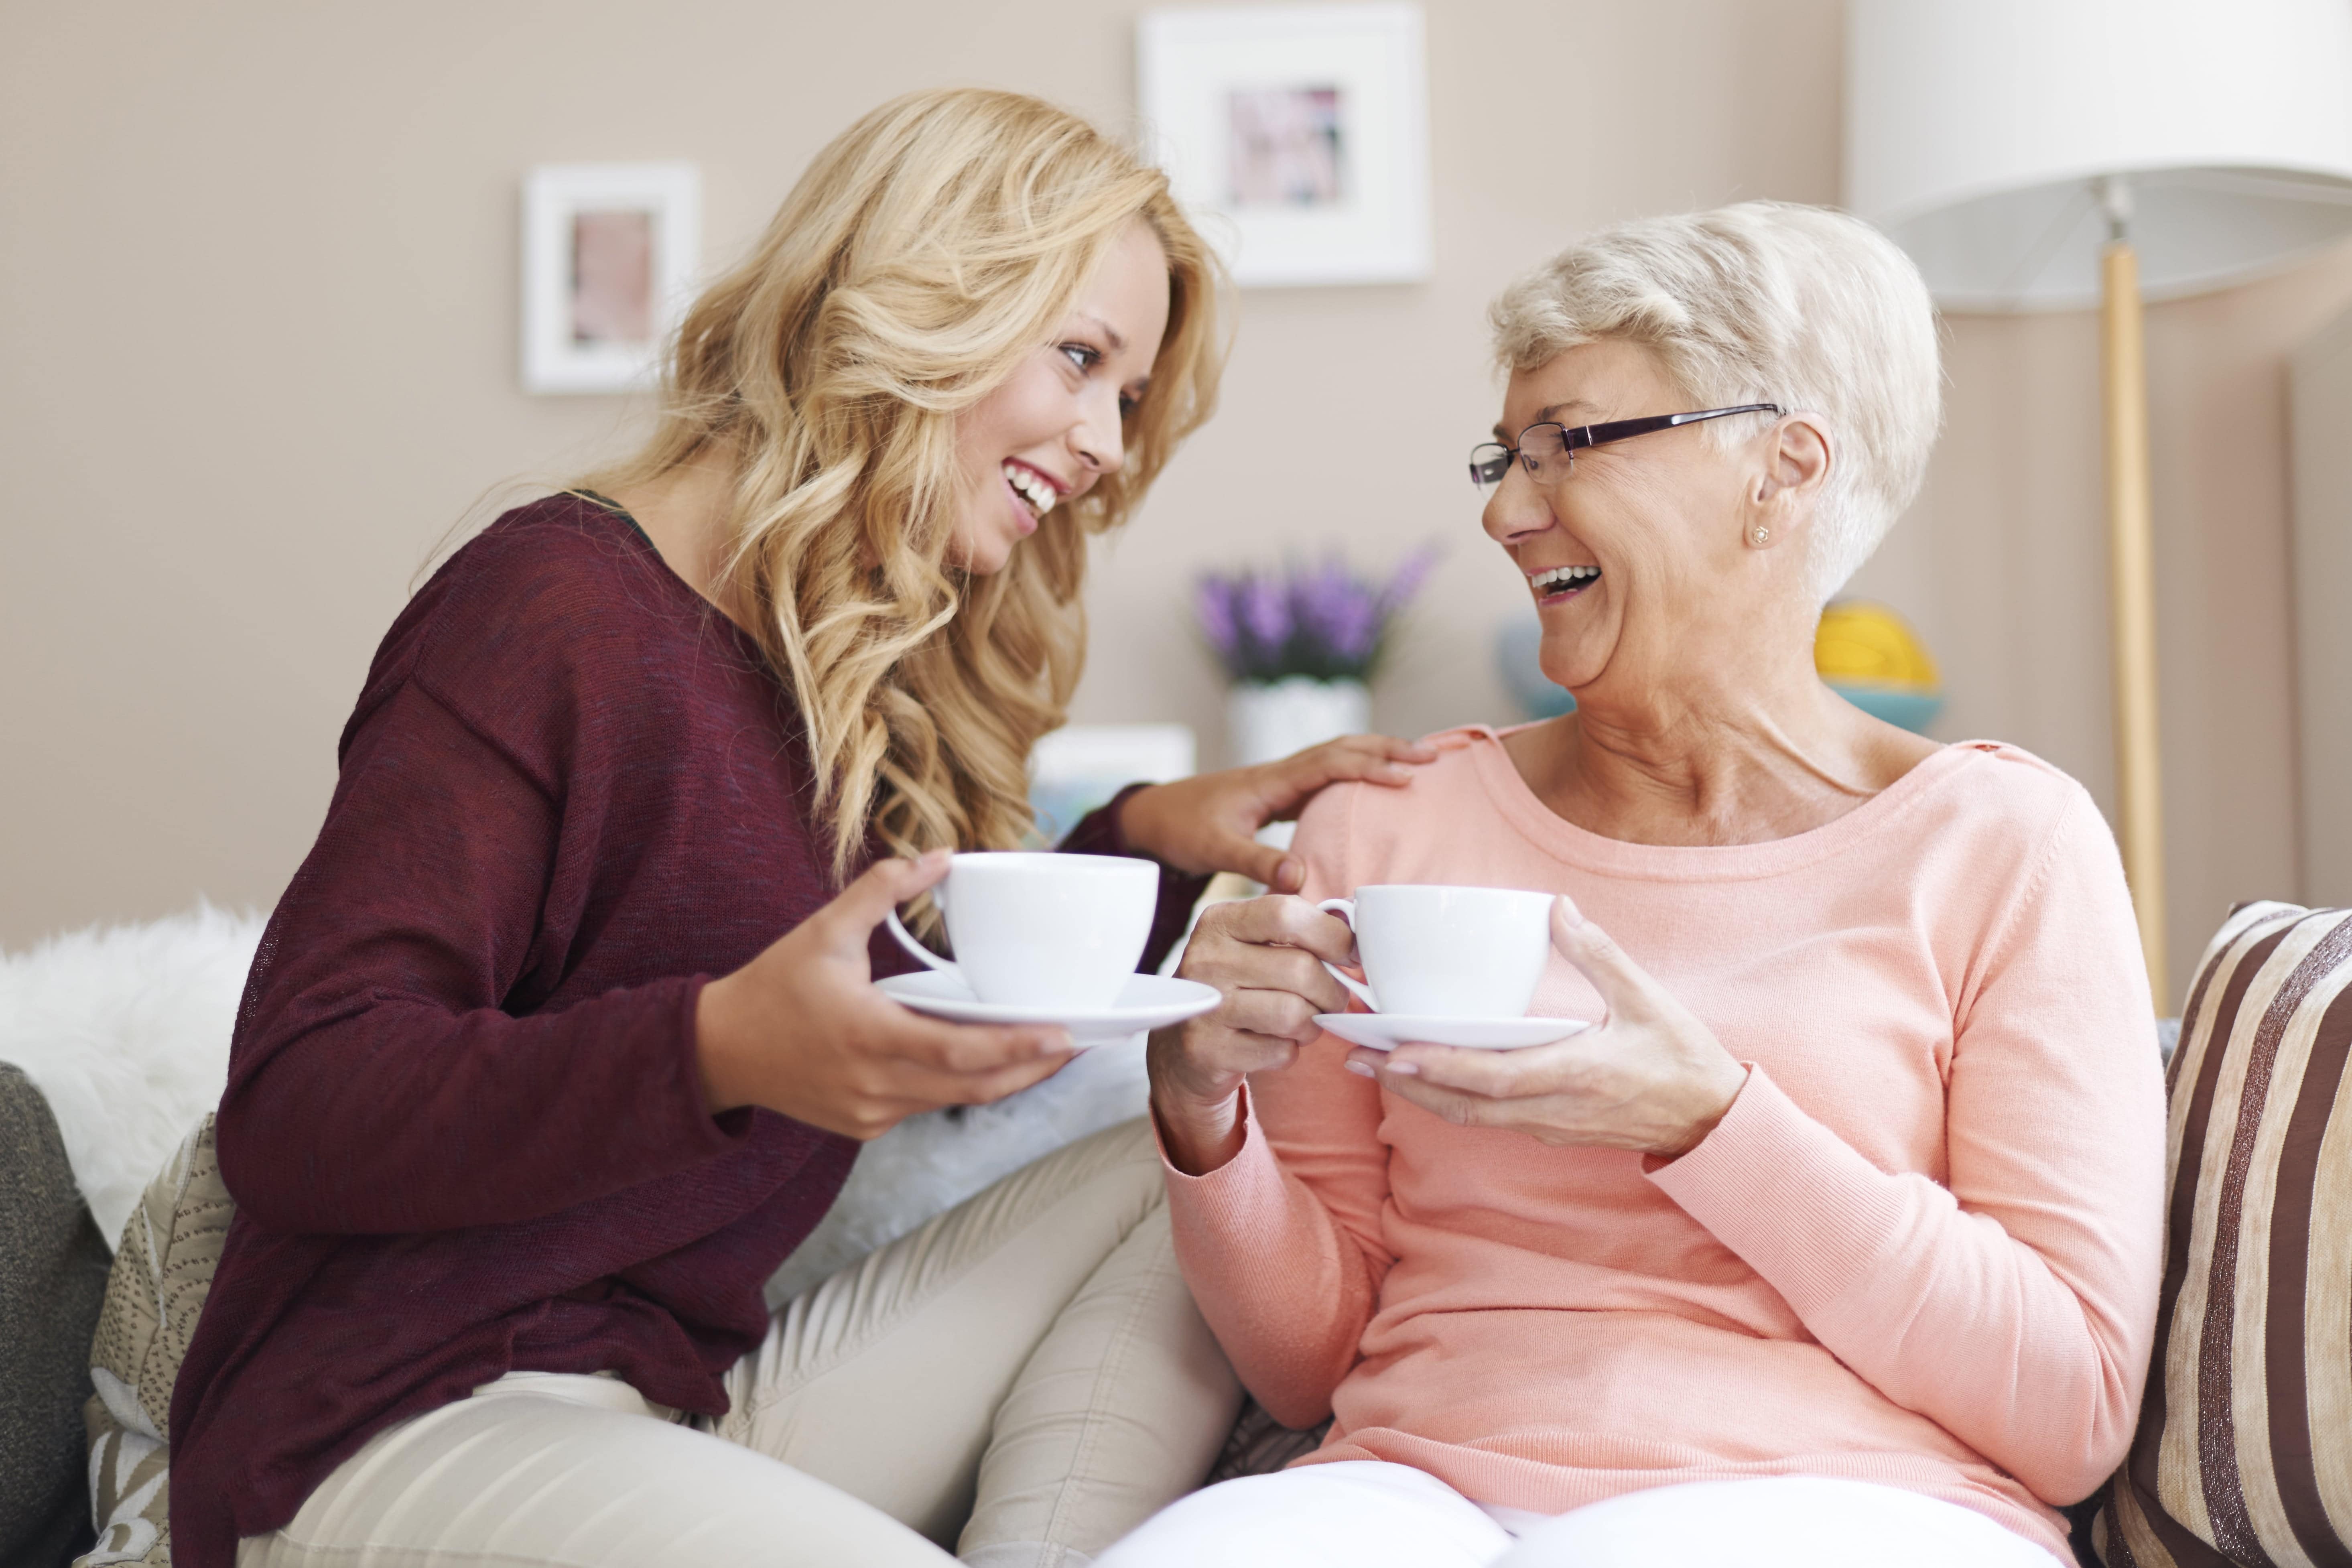 Young woman and grandma drinking tea and smiling